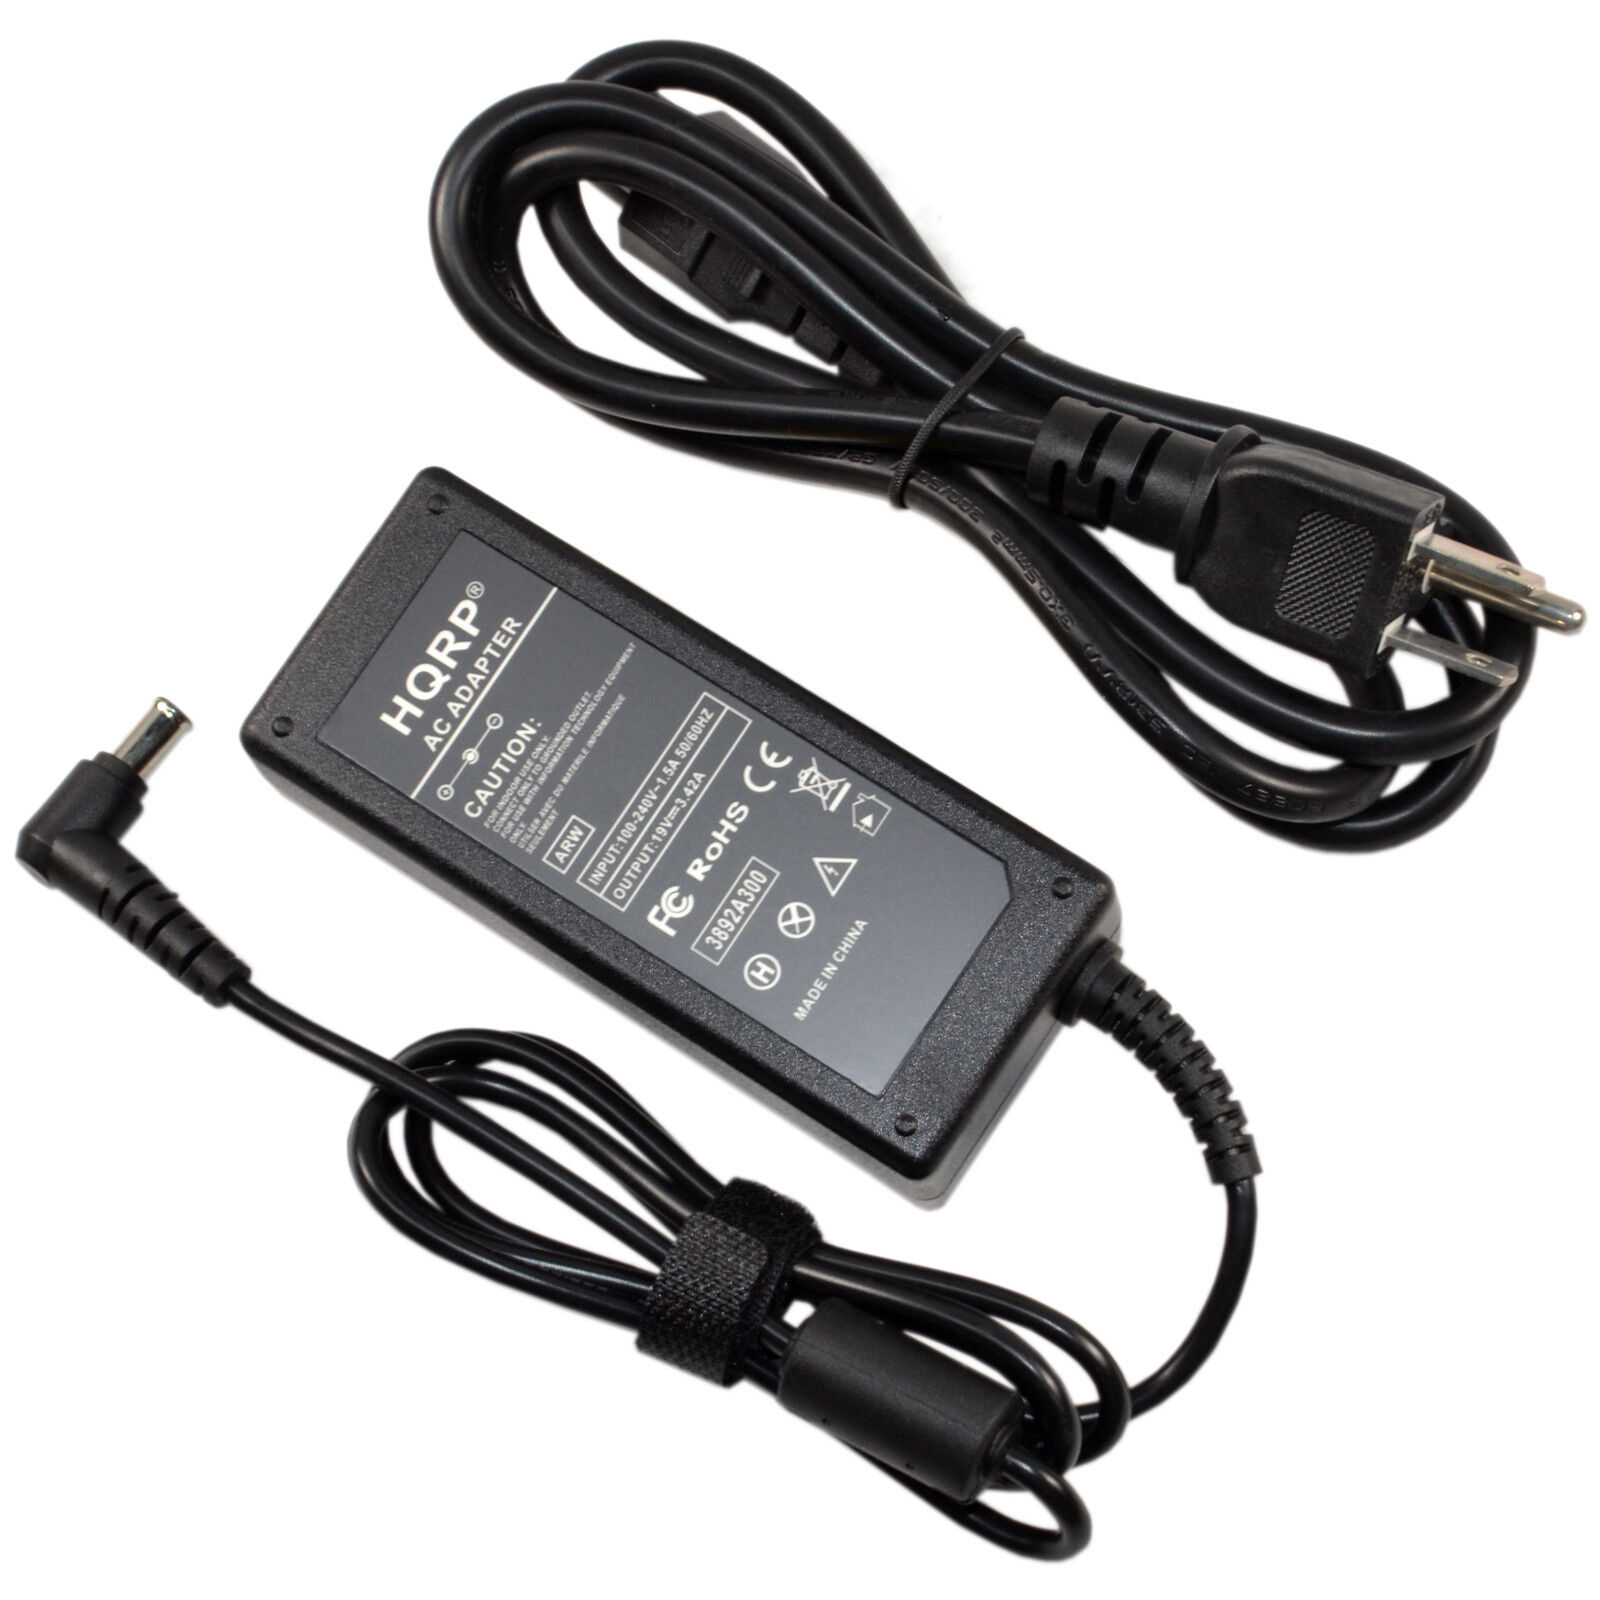 HQRP AC Power Adapter Charger for LG R400 R410 R460 R480 R490 R510 R580